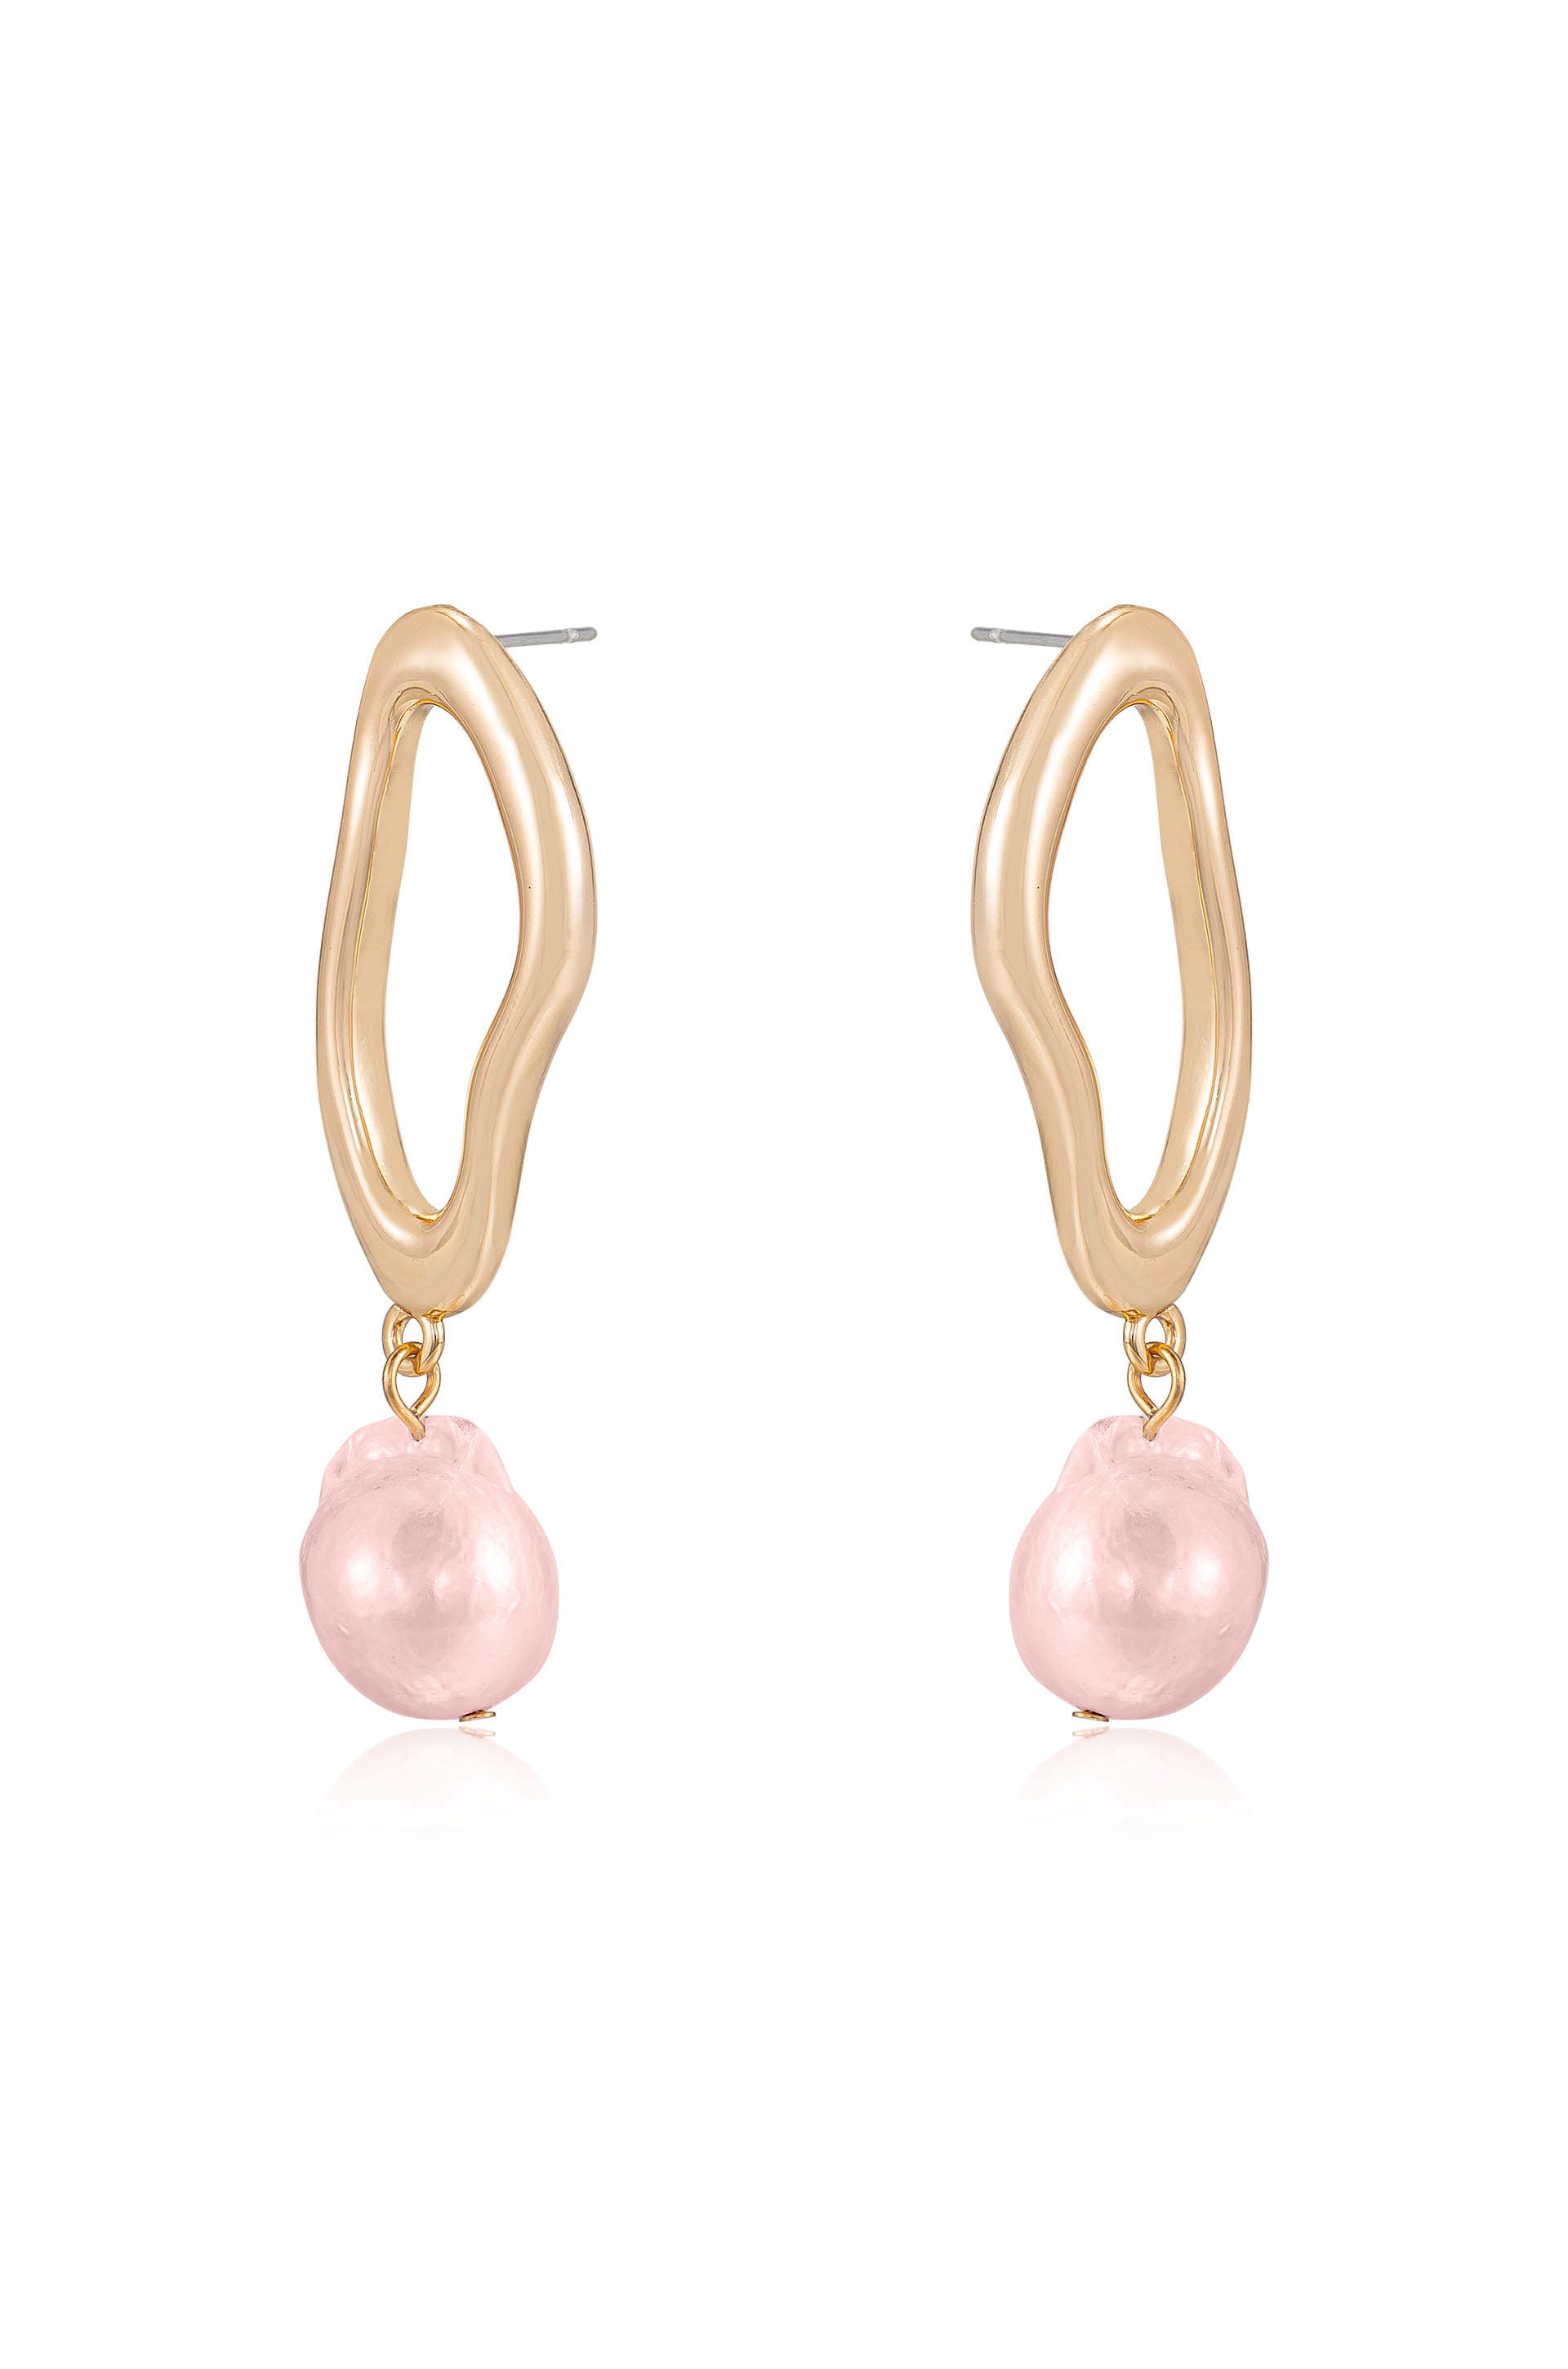 Open Circle 18k Gold Plated and Freshwater Pearl Dangle Earrings in pink pearl side view